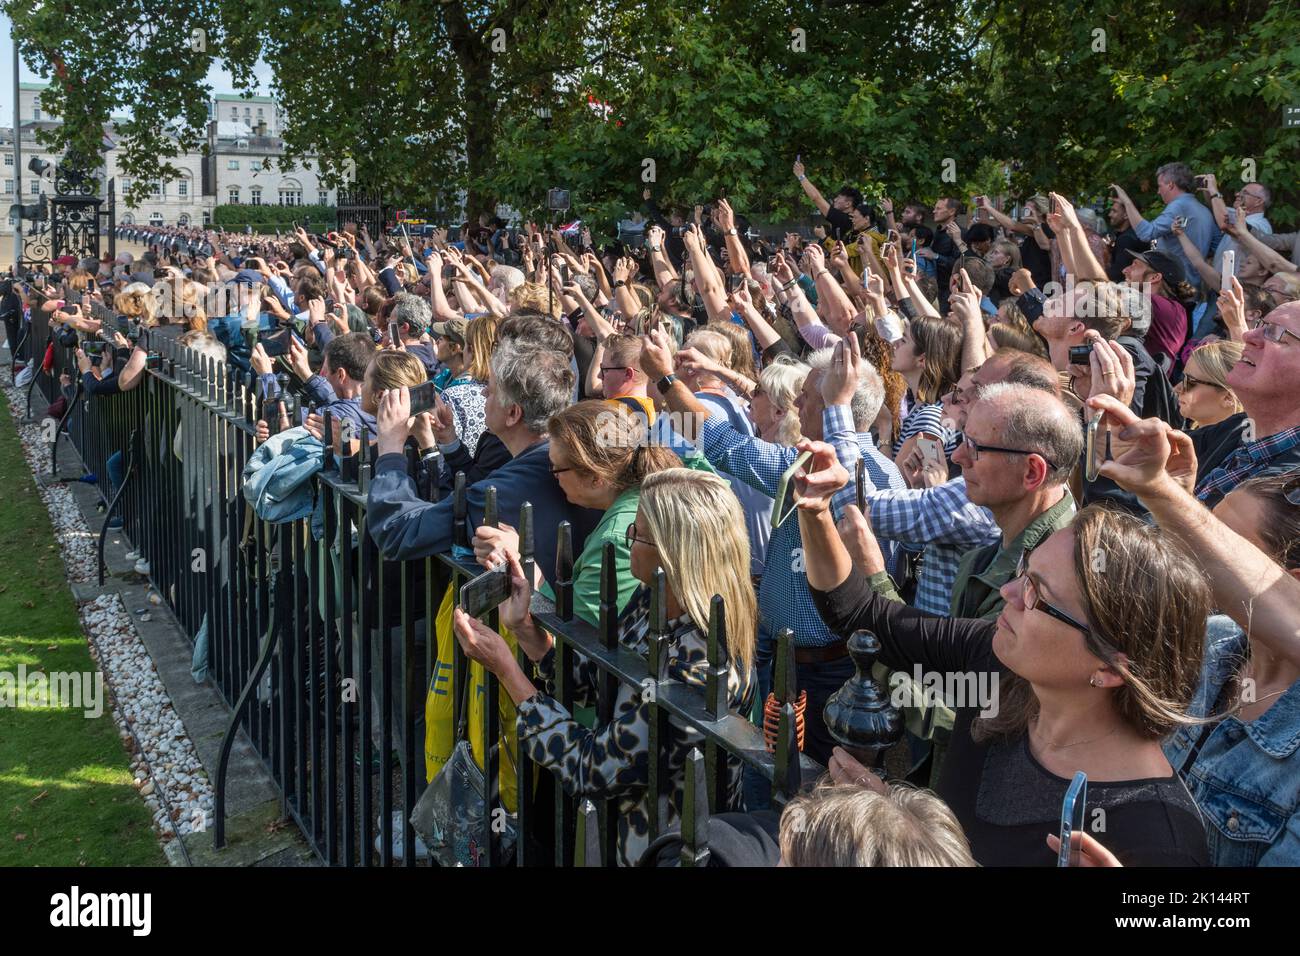 London, UK - as the funeral procession of the late Queen Elizabeth II enters Horse Guards Parade, the crowds of onlookers attempt to record the event on their mobile phones Stock Photo